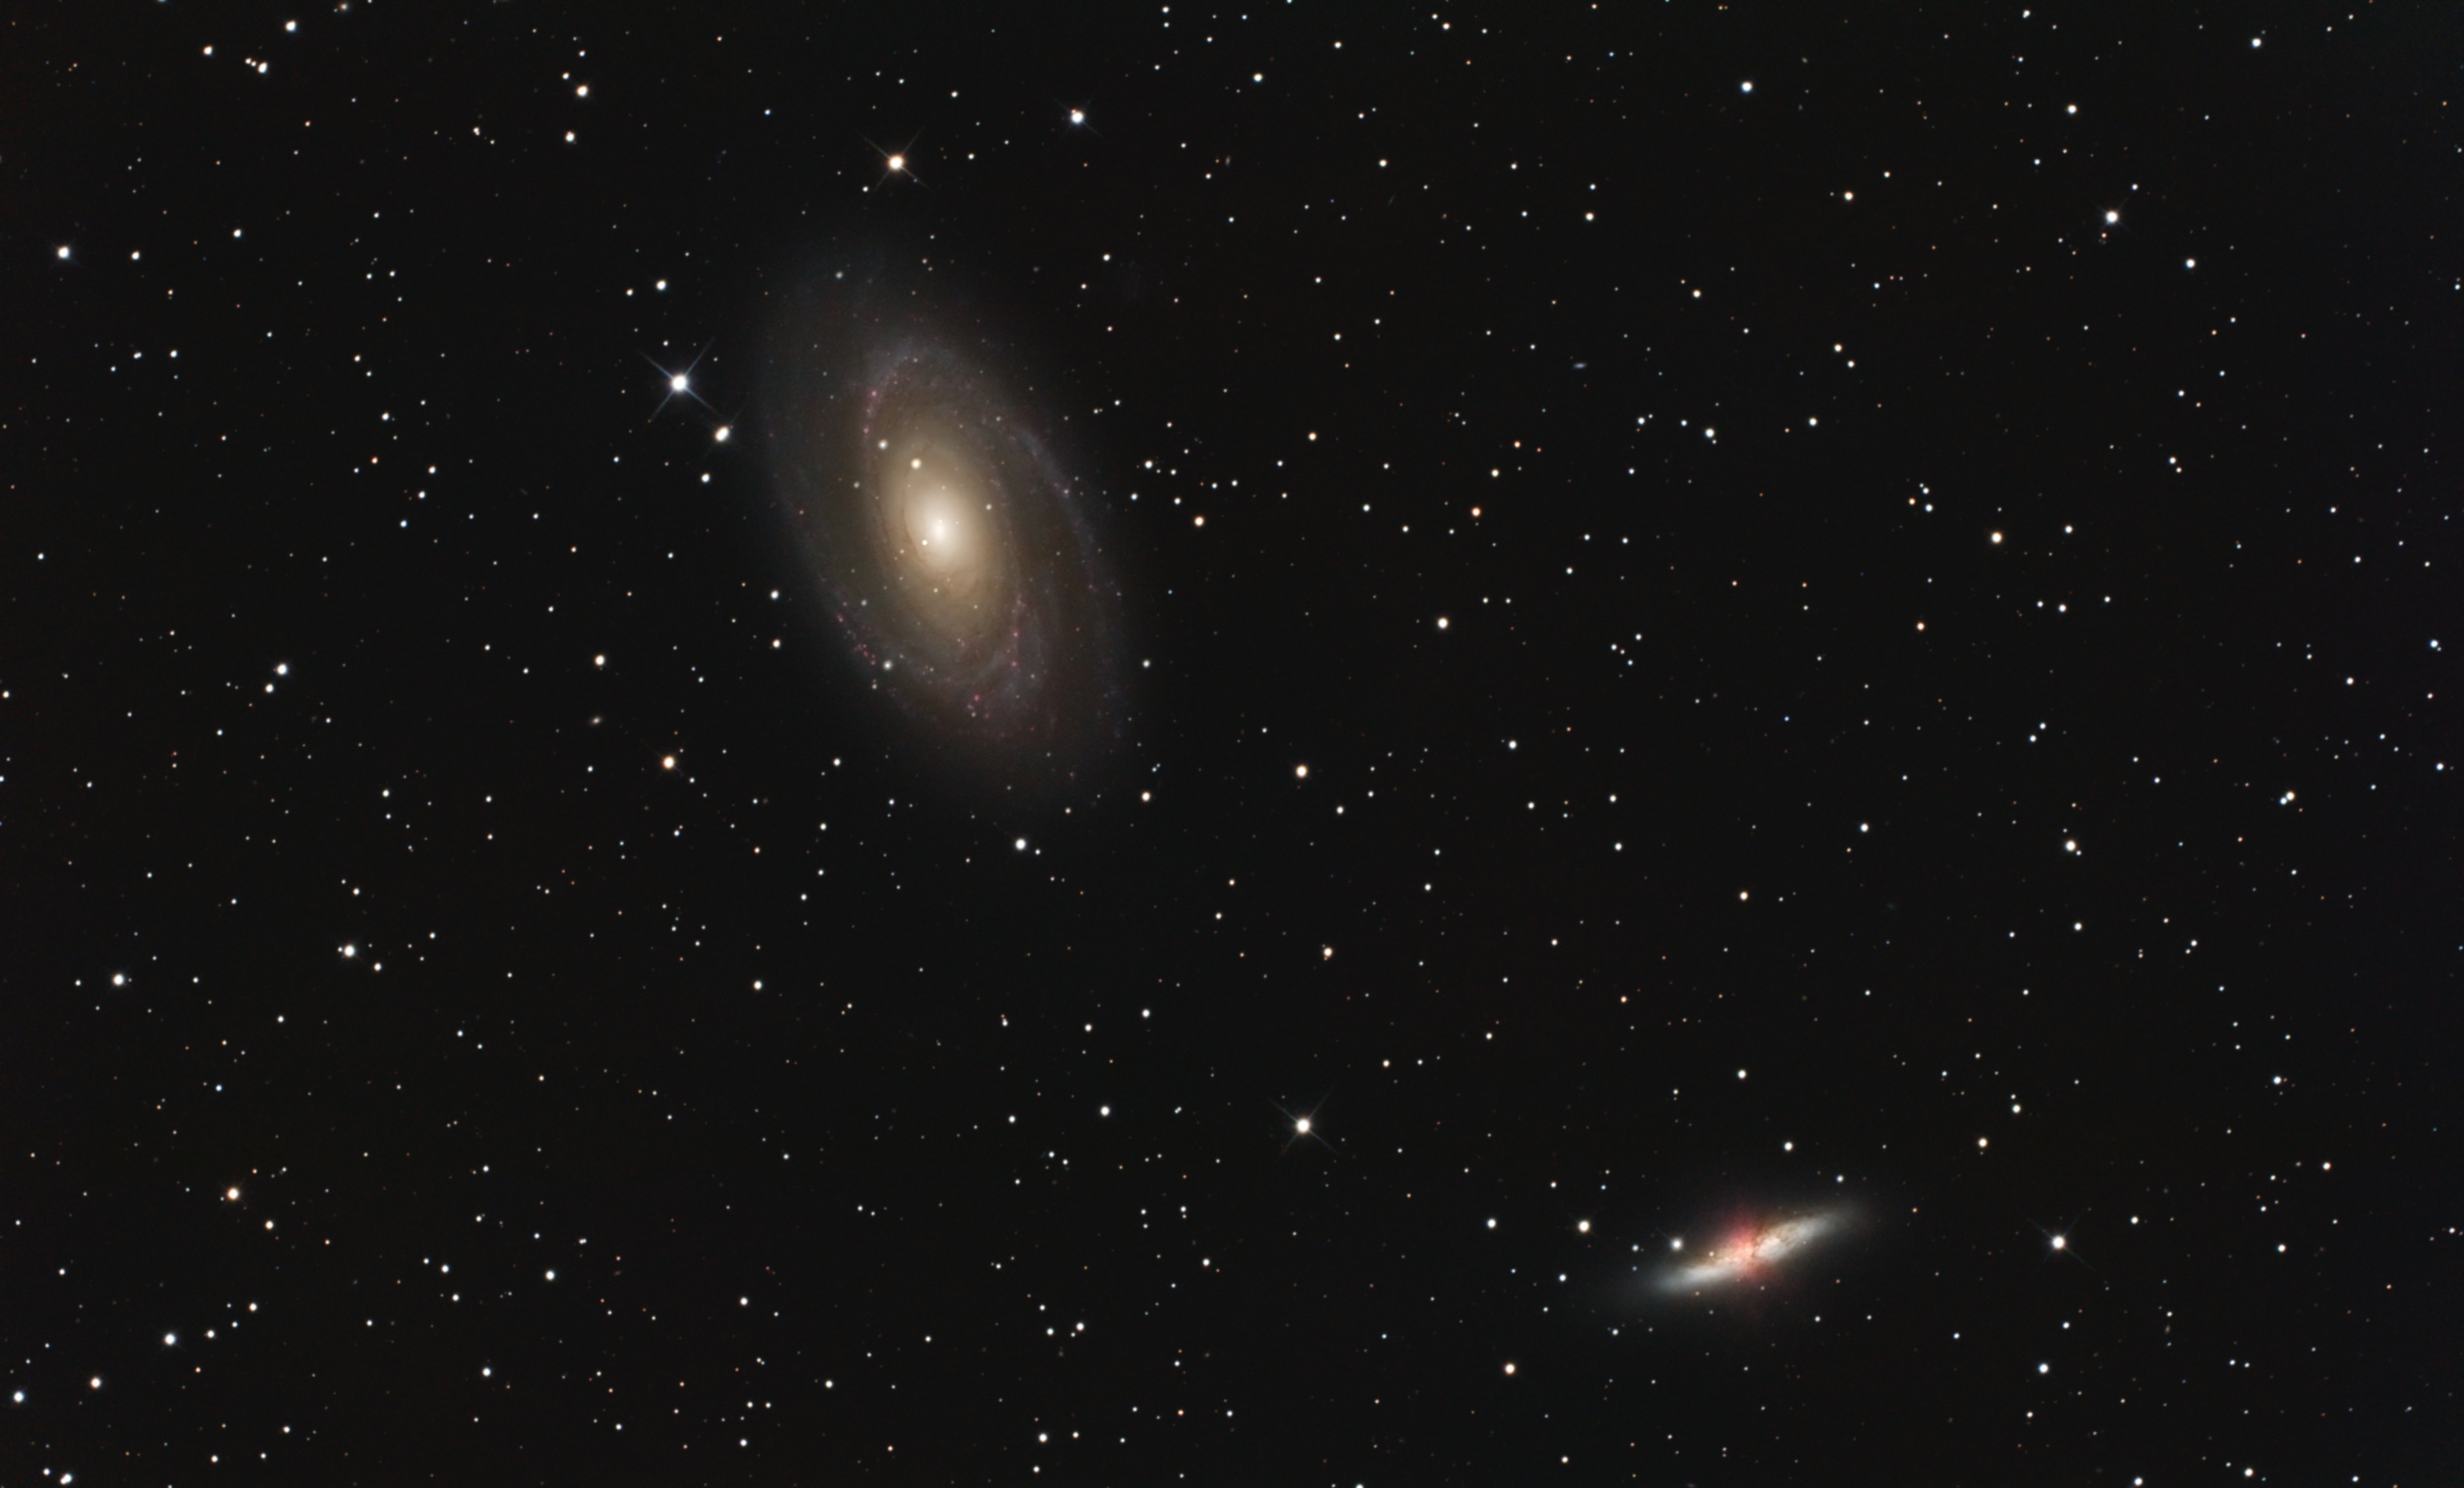 image from Bode's Galaxy & Cigar Galaxy